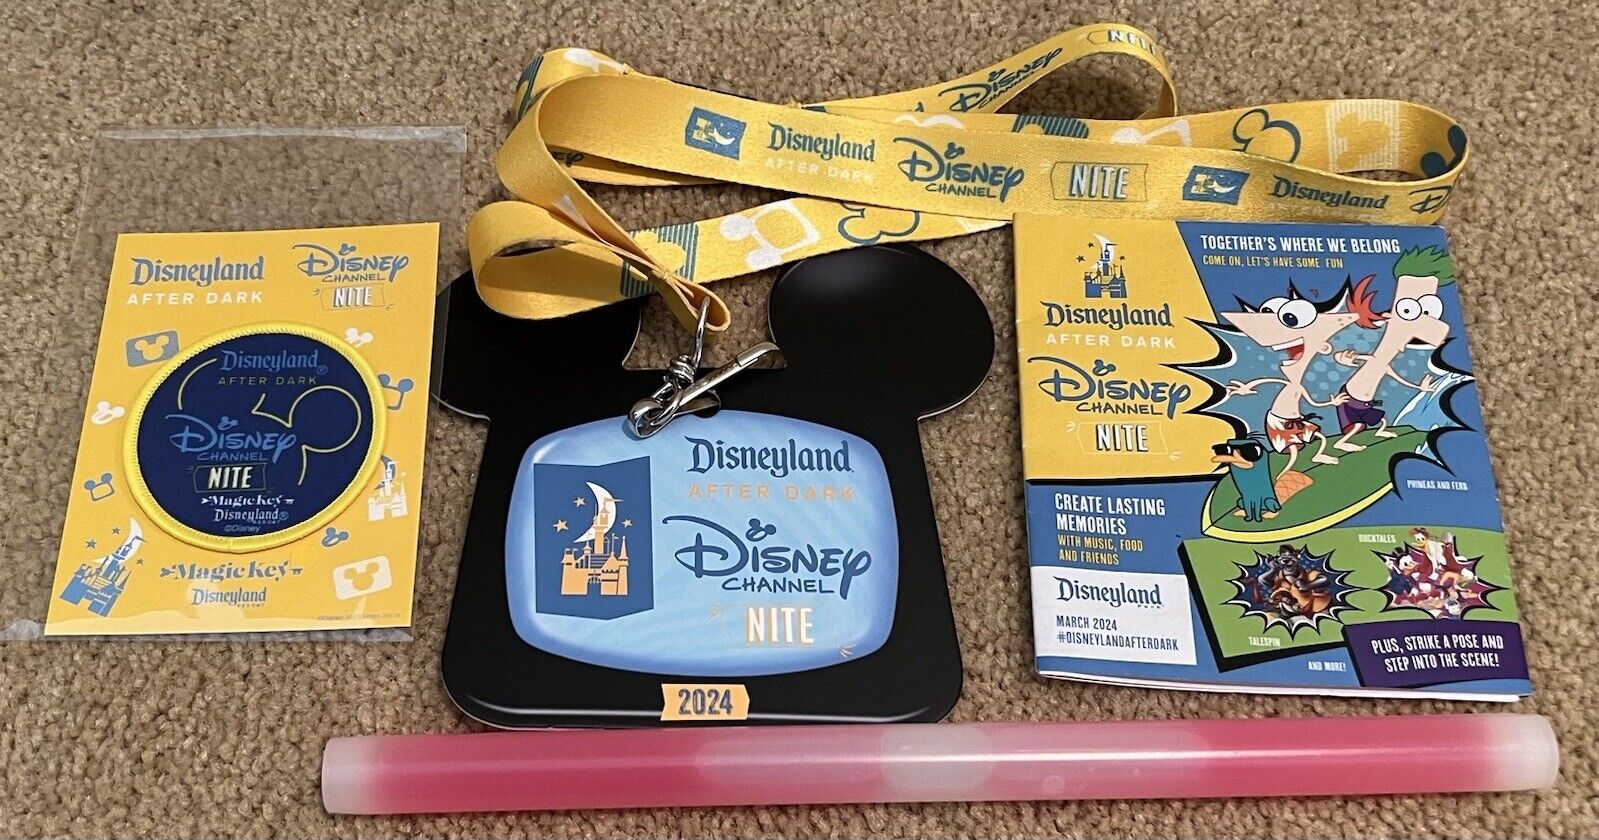 DL Disney Channel Nite Event Map, Glow Stick, Magic Key Patch and Lanyard 2024